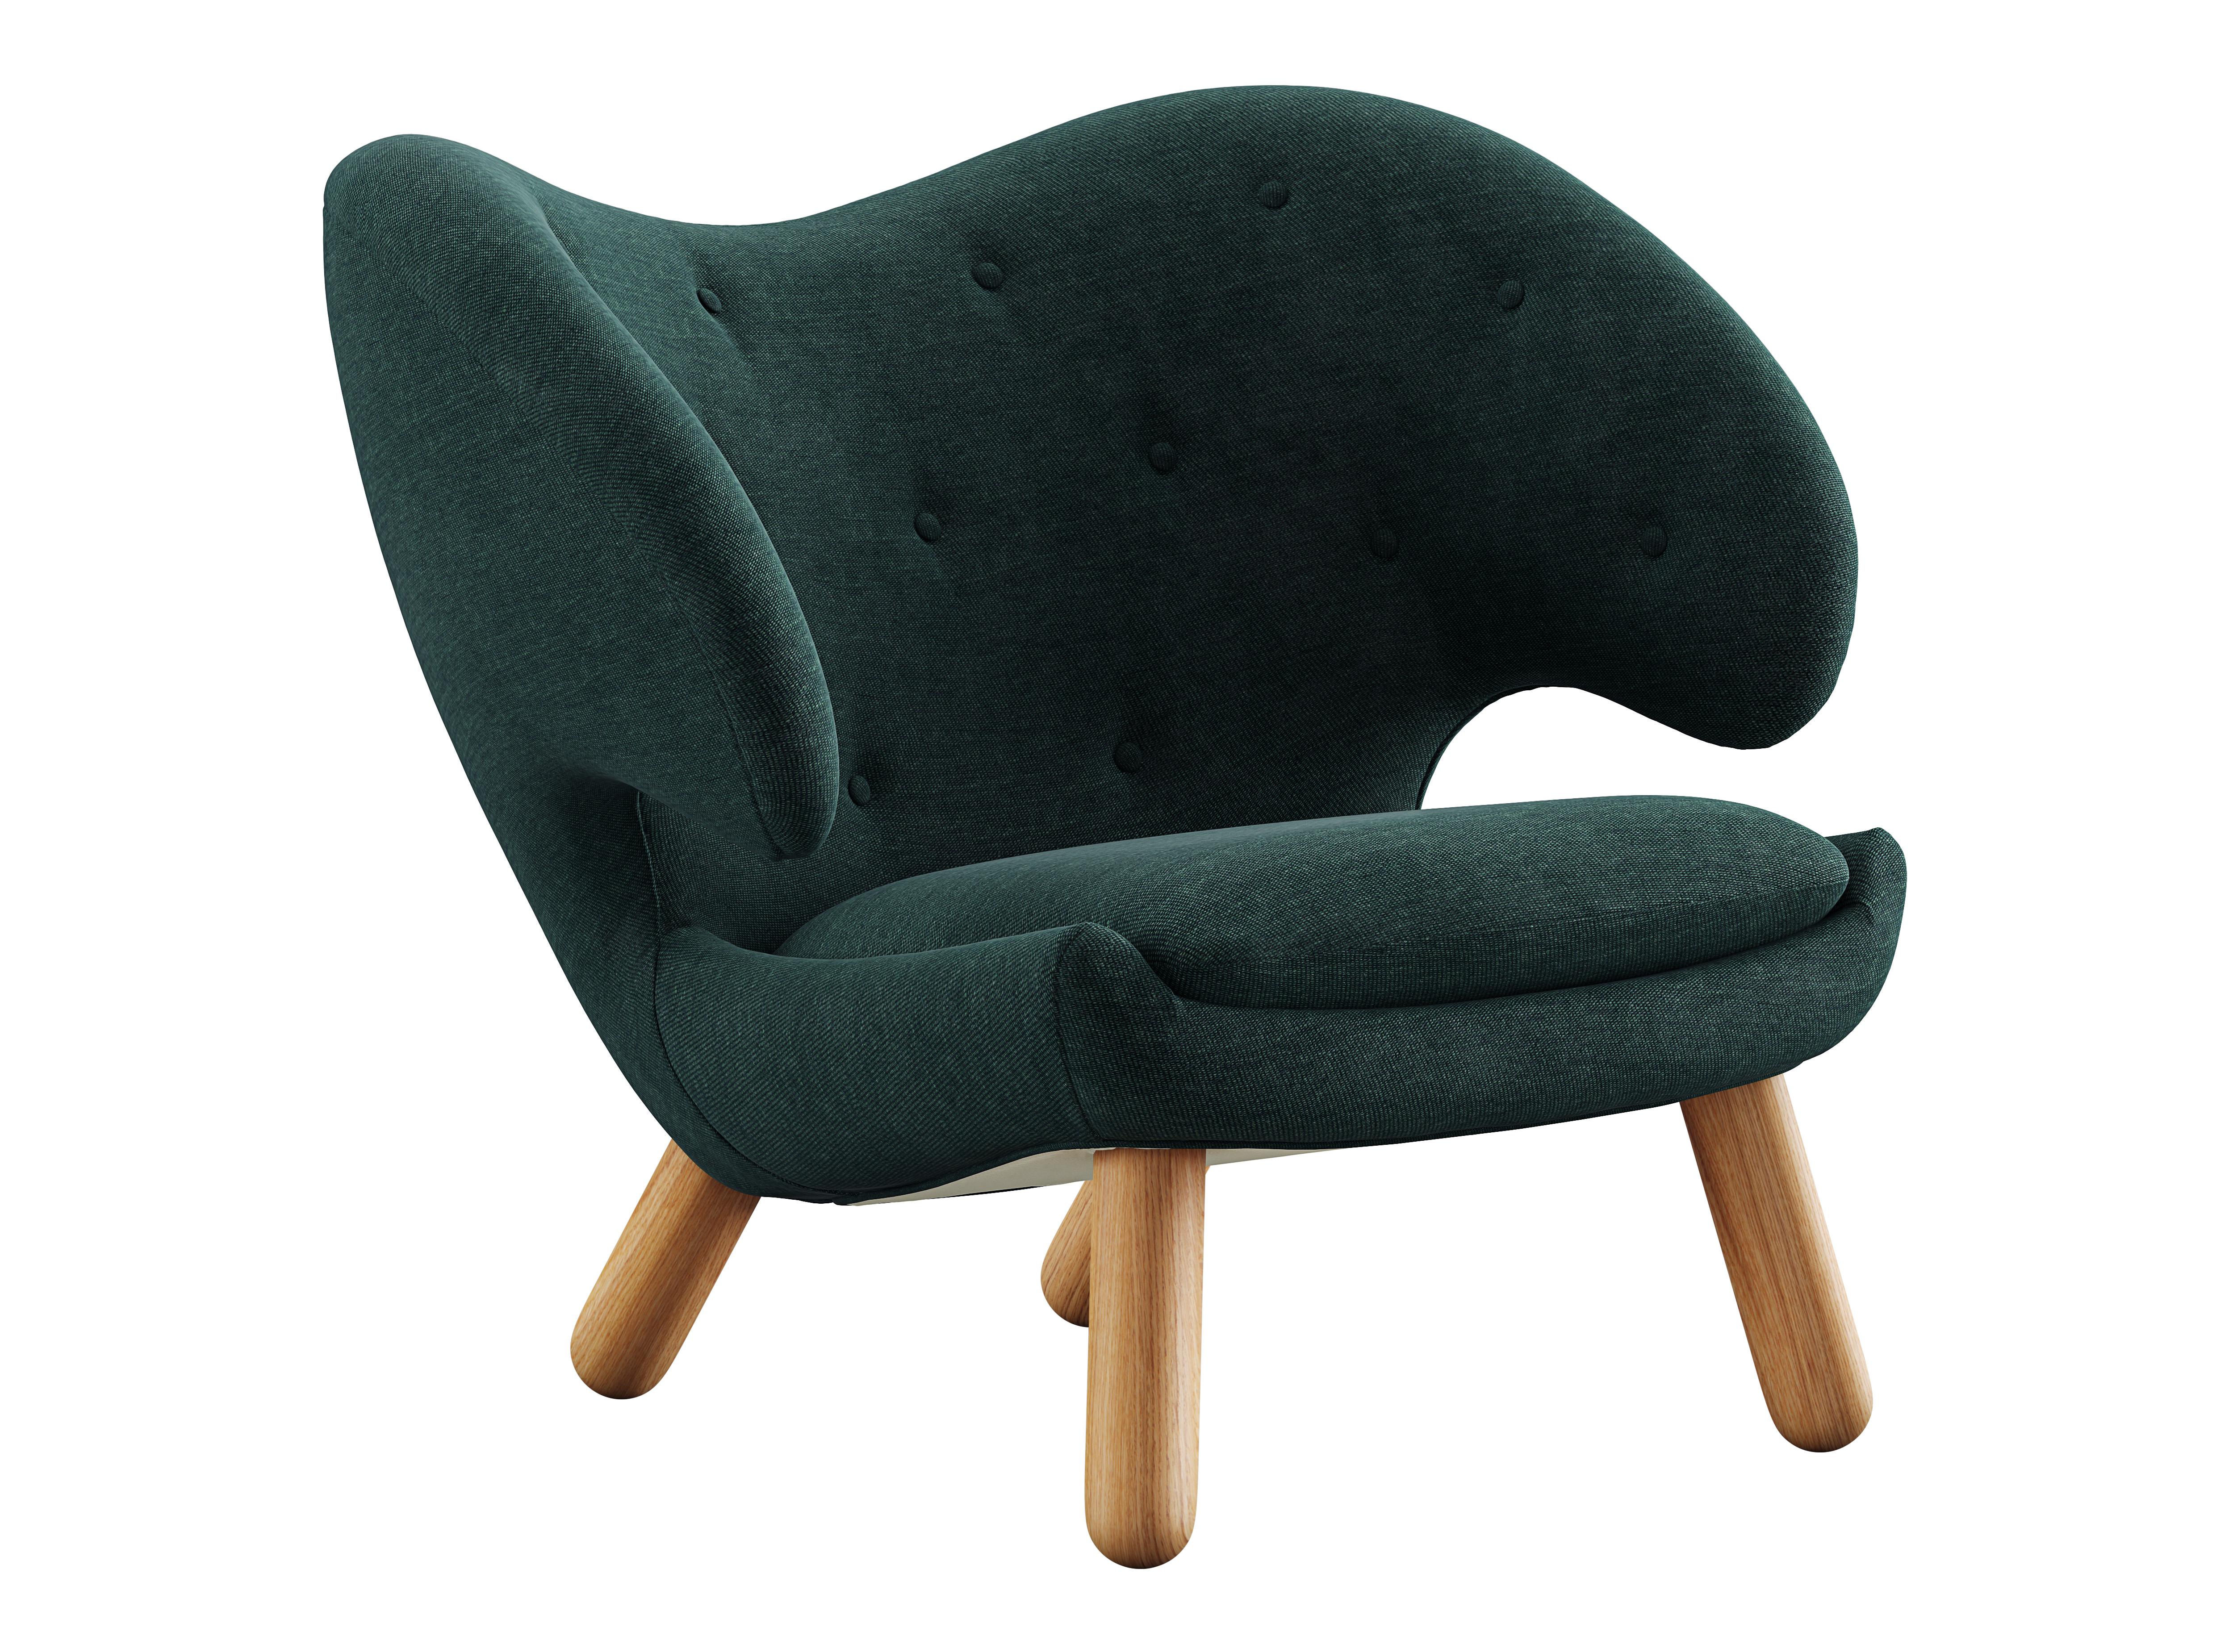 Pelican chair designed by Finn Juhl in 1940.
Manufactured by House of Finn Juhl in Denmark.

Pelican chair was probably the one furthest ahead of its time. When it was presented at the Copenhagen Cabinetmakers’ Guild Exhibition in 1940, it stood